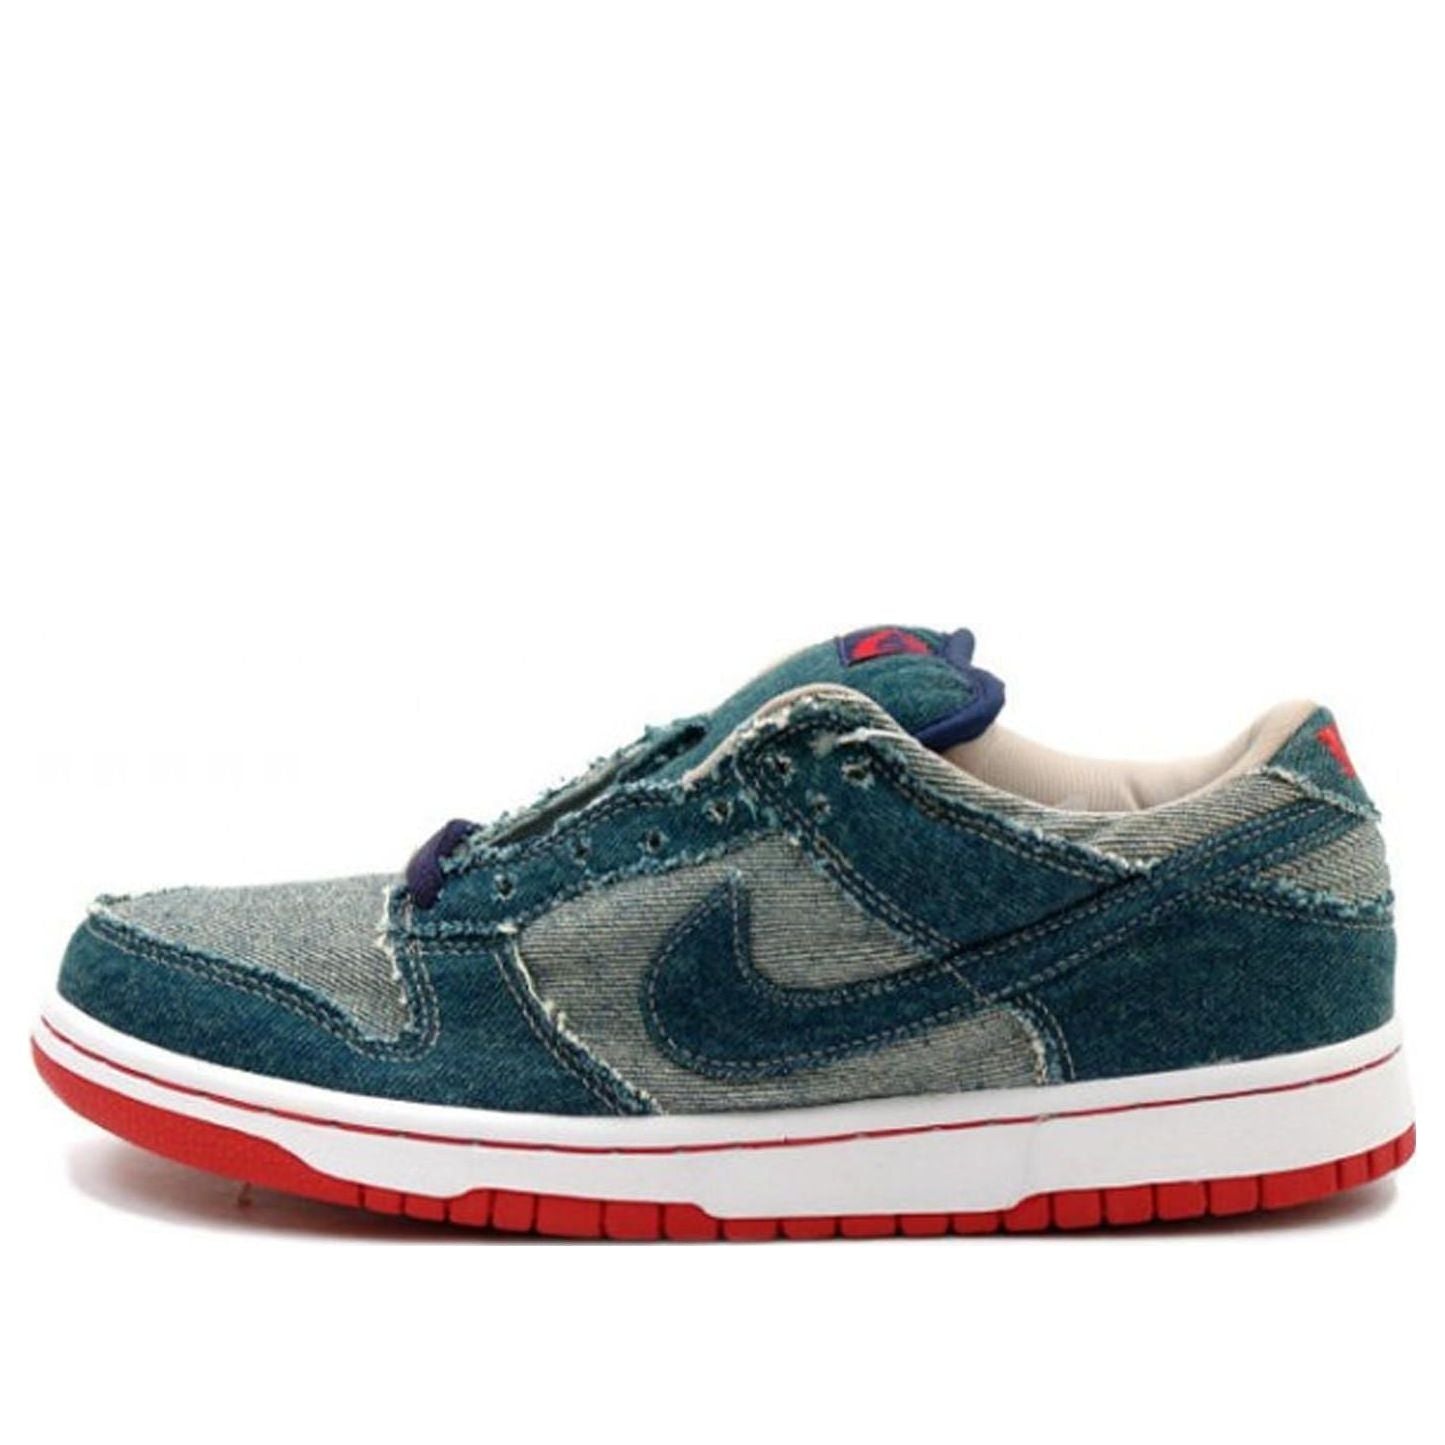 Nike Reese Forbes x Dunk Low Pro SB 'Denim'  304292-441 Iconic Trainers